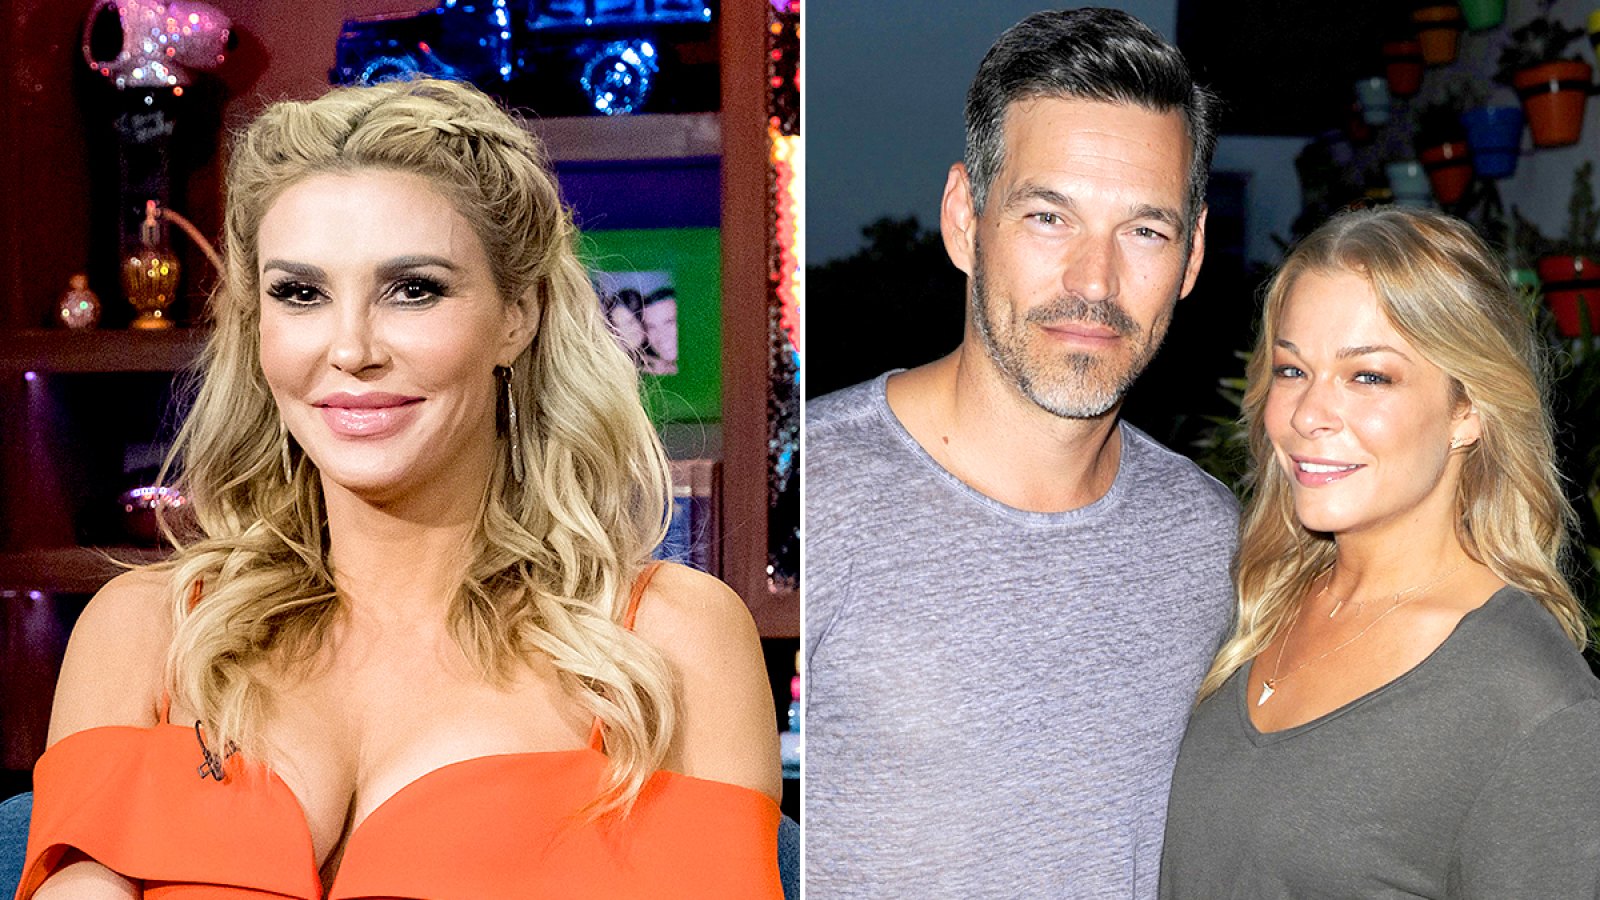 Brandi-Glanville-Says-Her-Feud-with-Eddie-Cibrian-and-LeAnn-Rimes-Is-Over